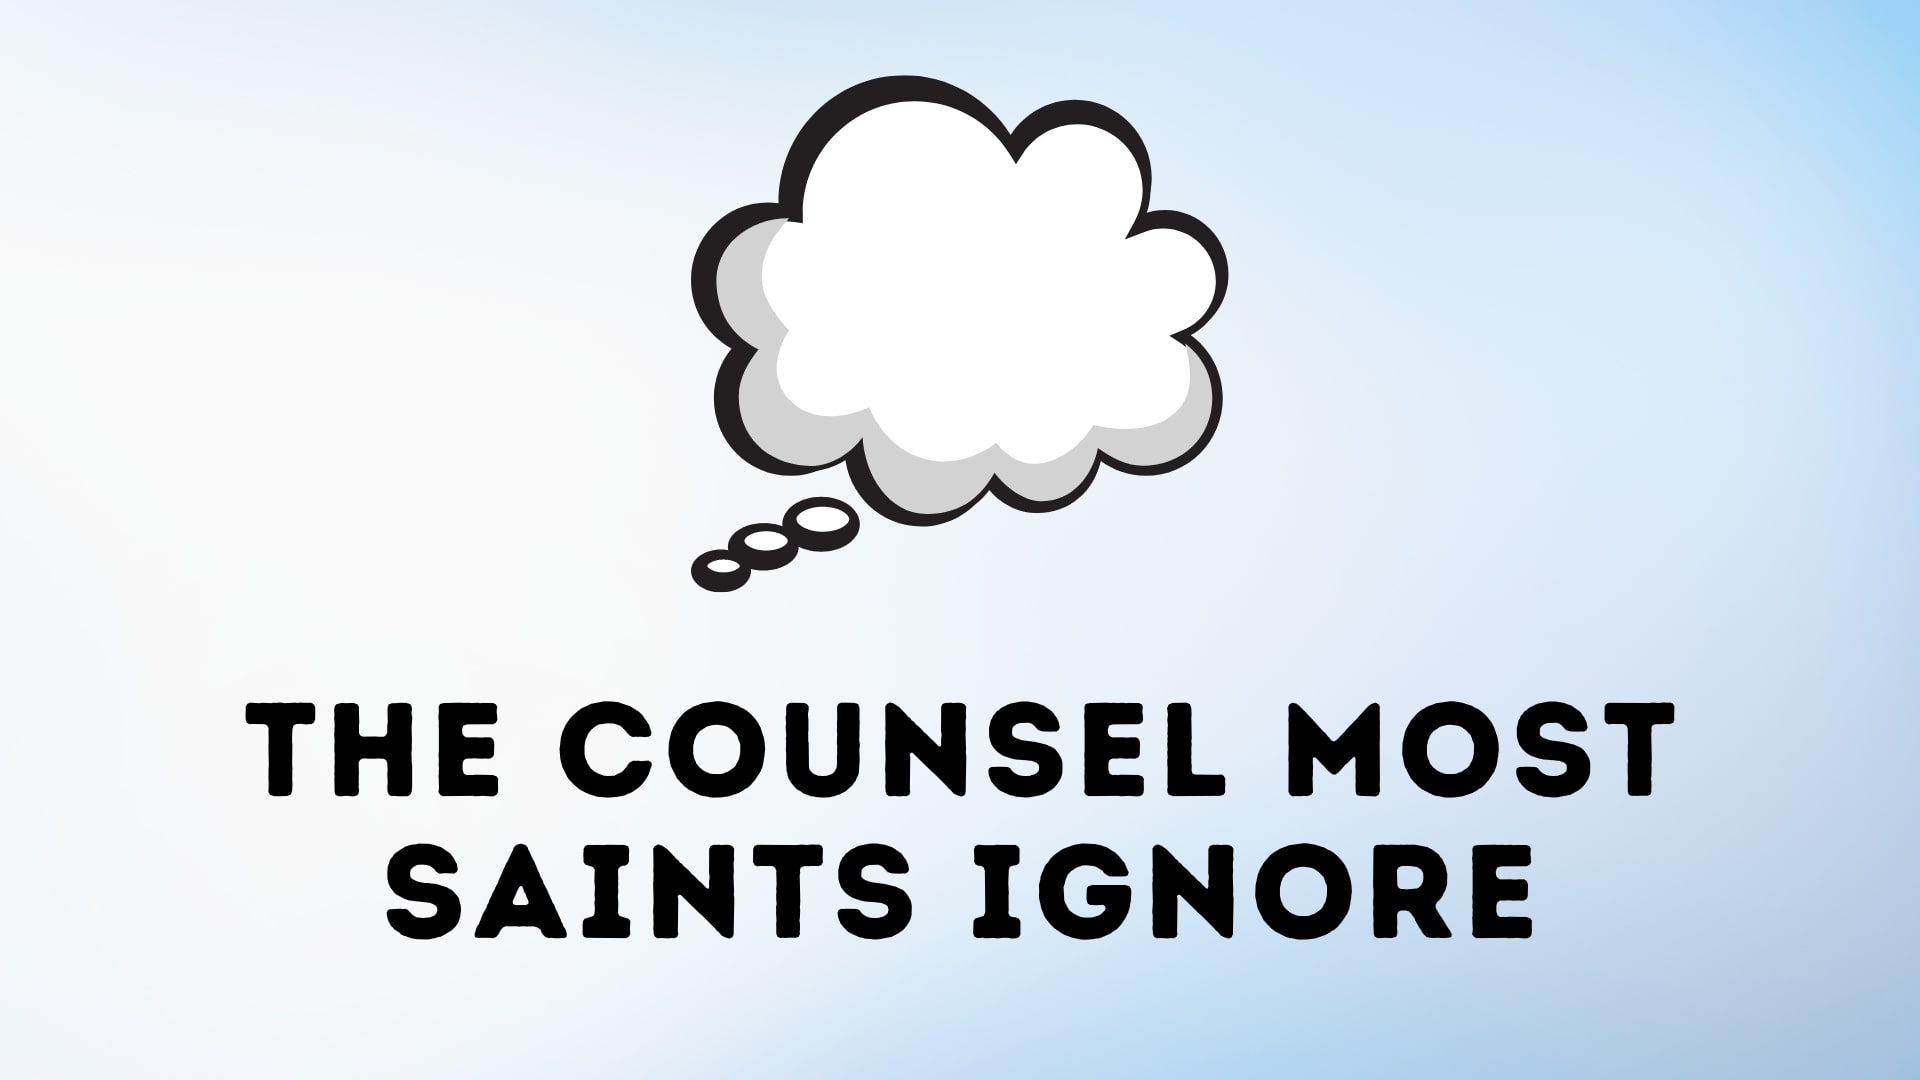 The Counsel Most Saints Ignore